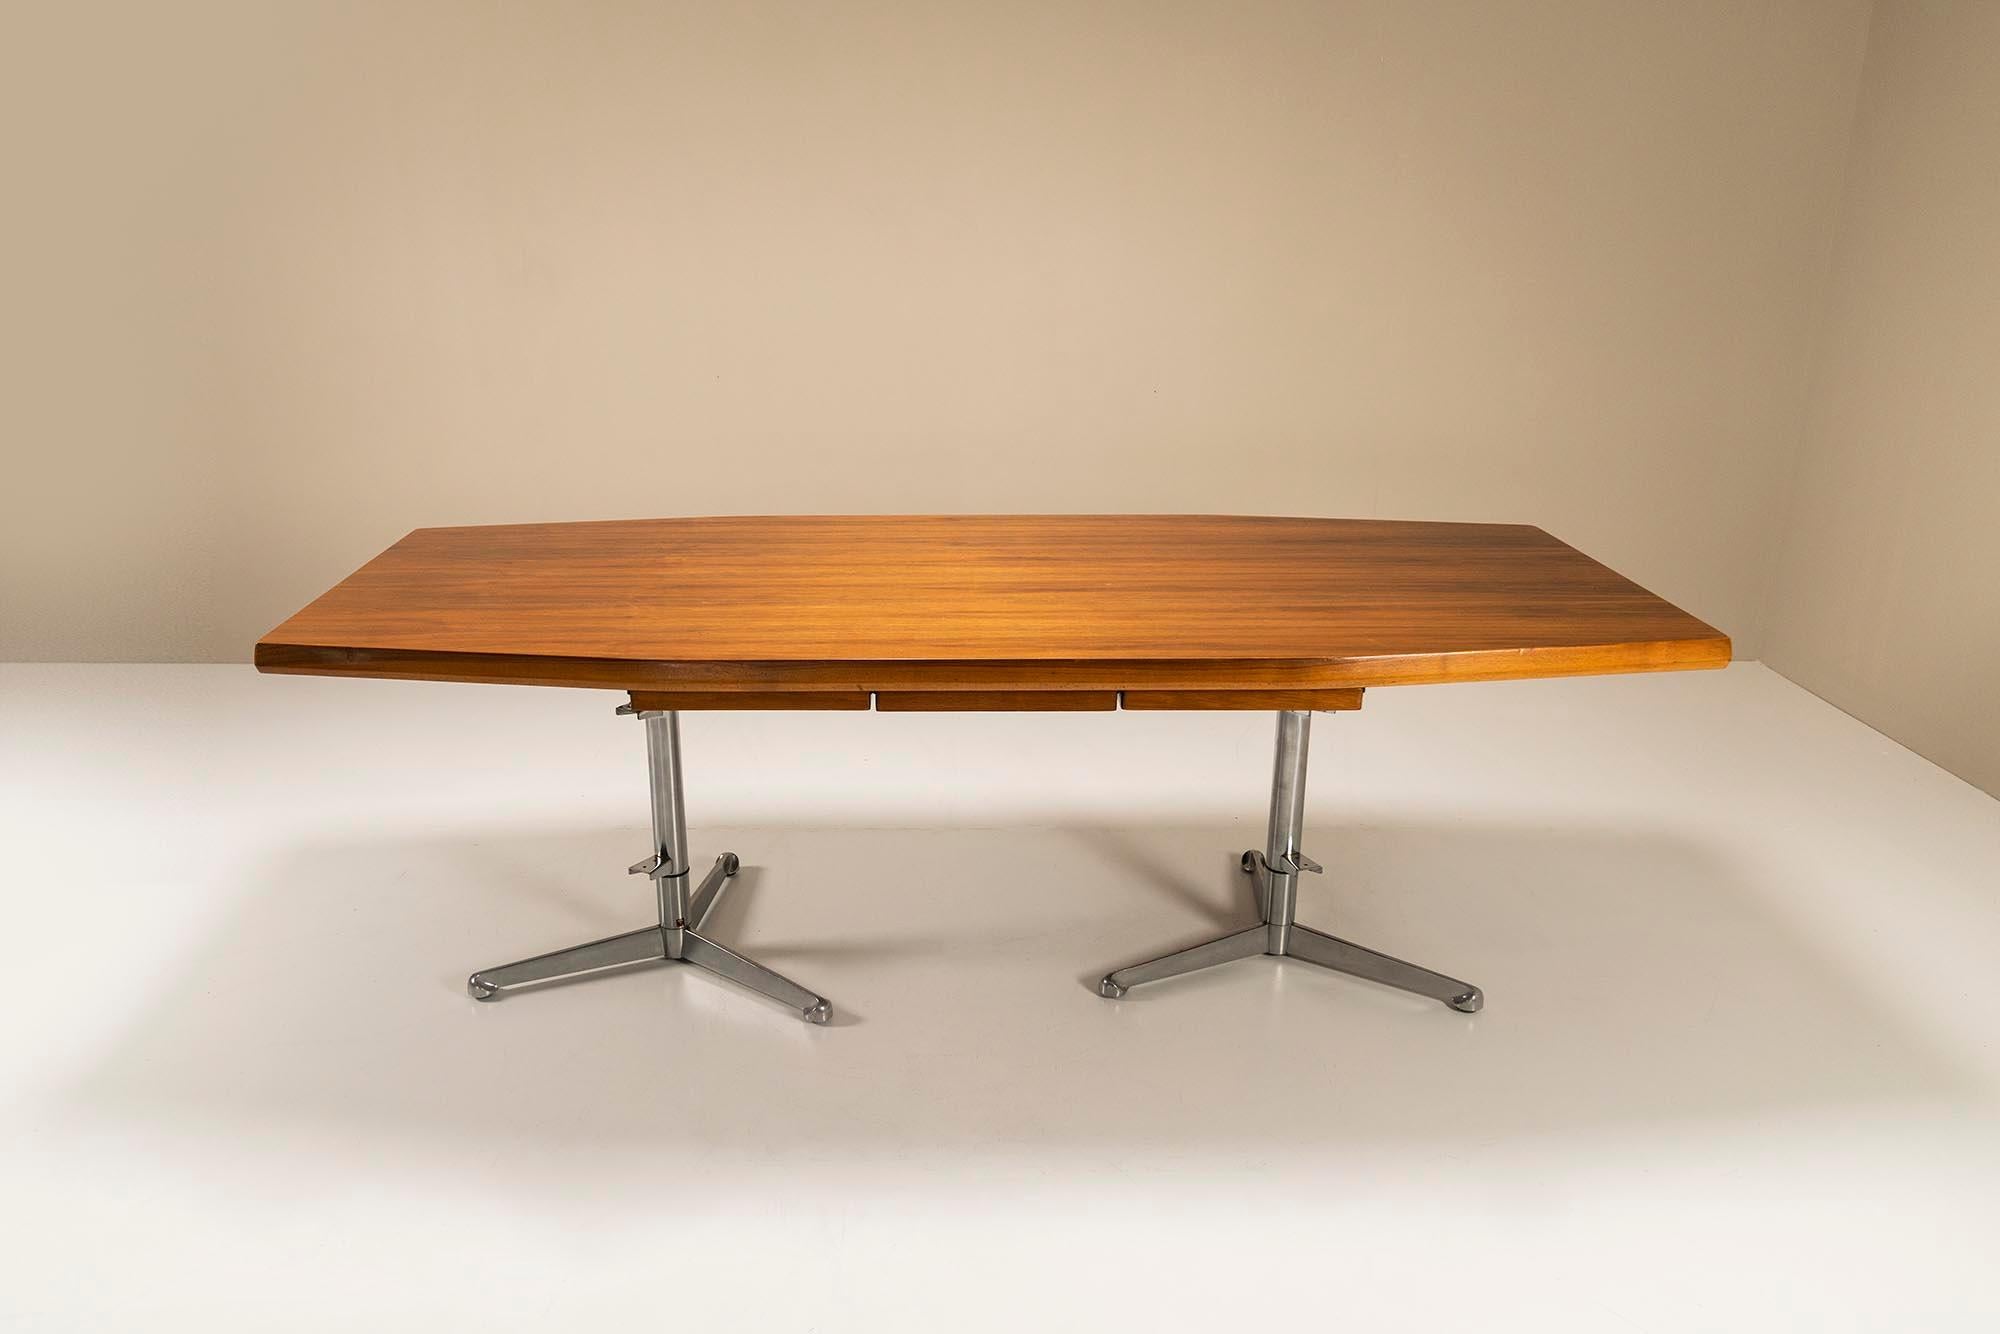 This Italian 1950s desk, which can also serve as a table, exudes an unprecedented class and elegance. The very solid boat-shaped top is made of walnut wood and shows a beautiful drawing. Italian walnut is seen as one of the most beautiful and that